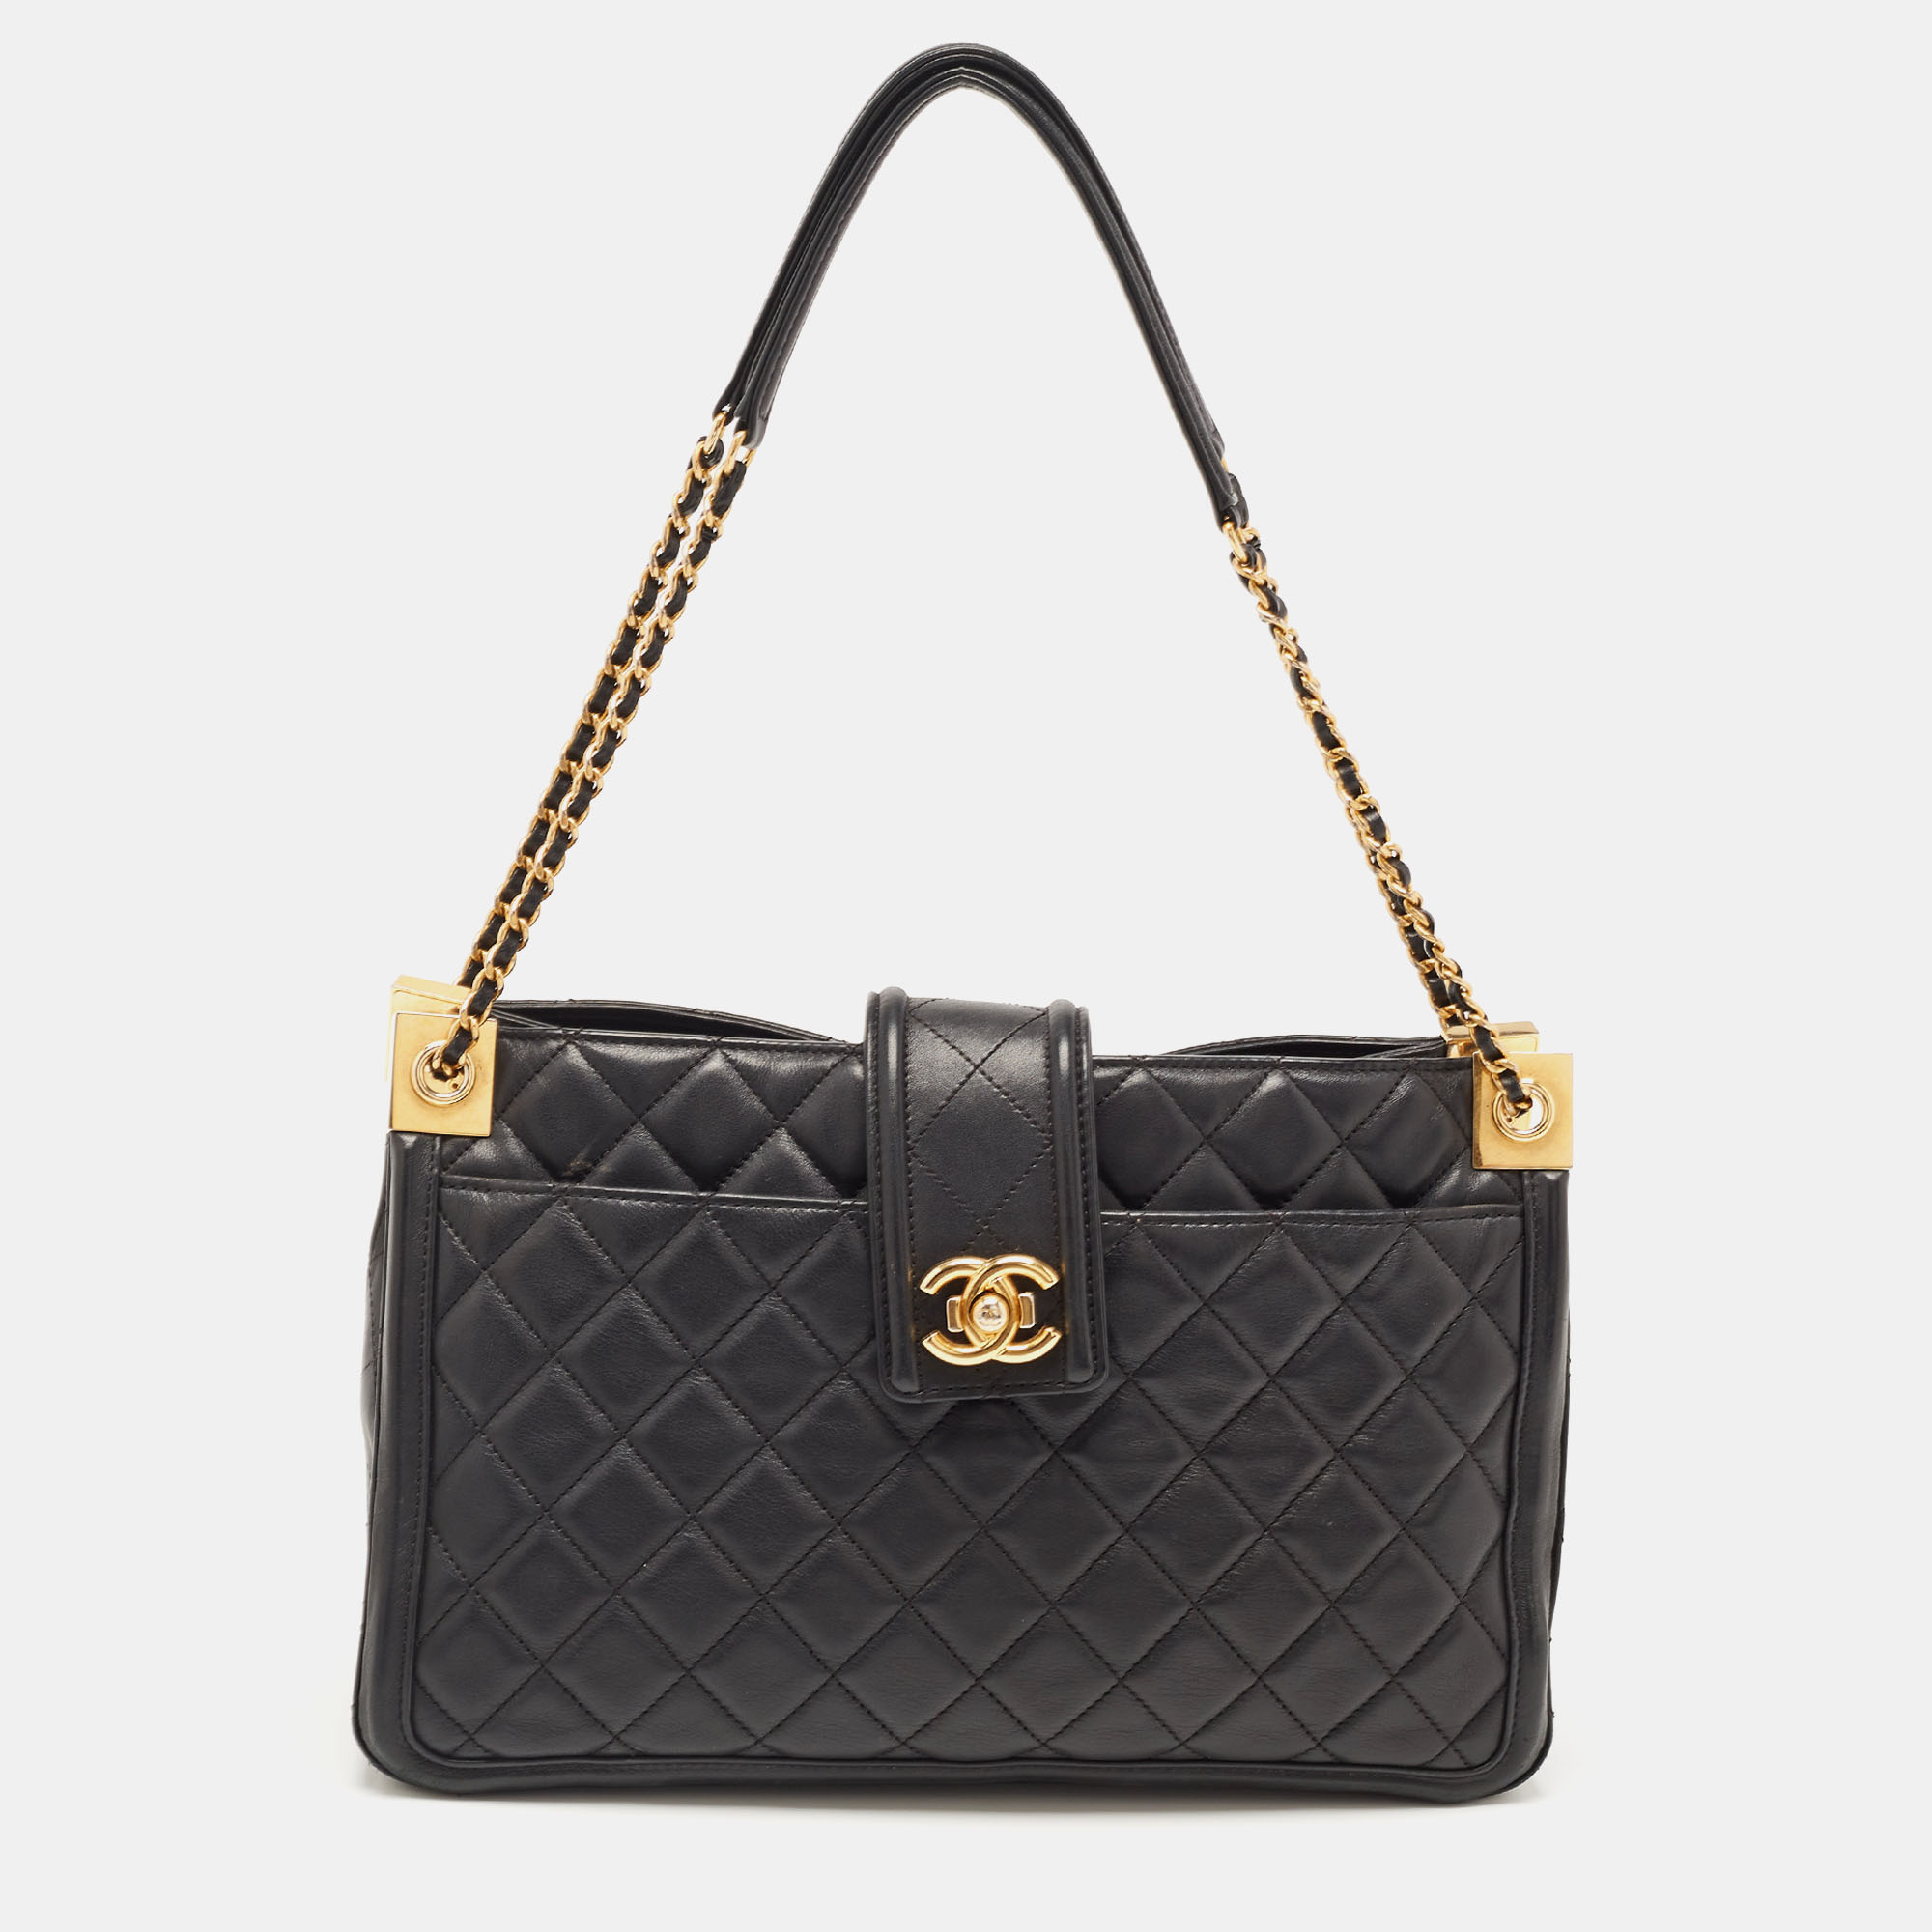 Chanel Black Quilted Leather Elegant Tote